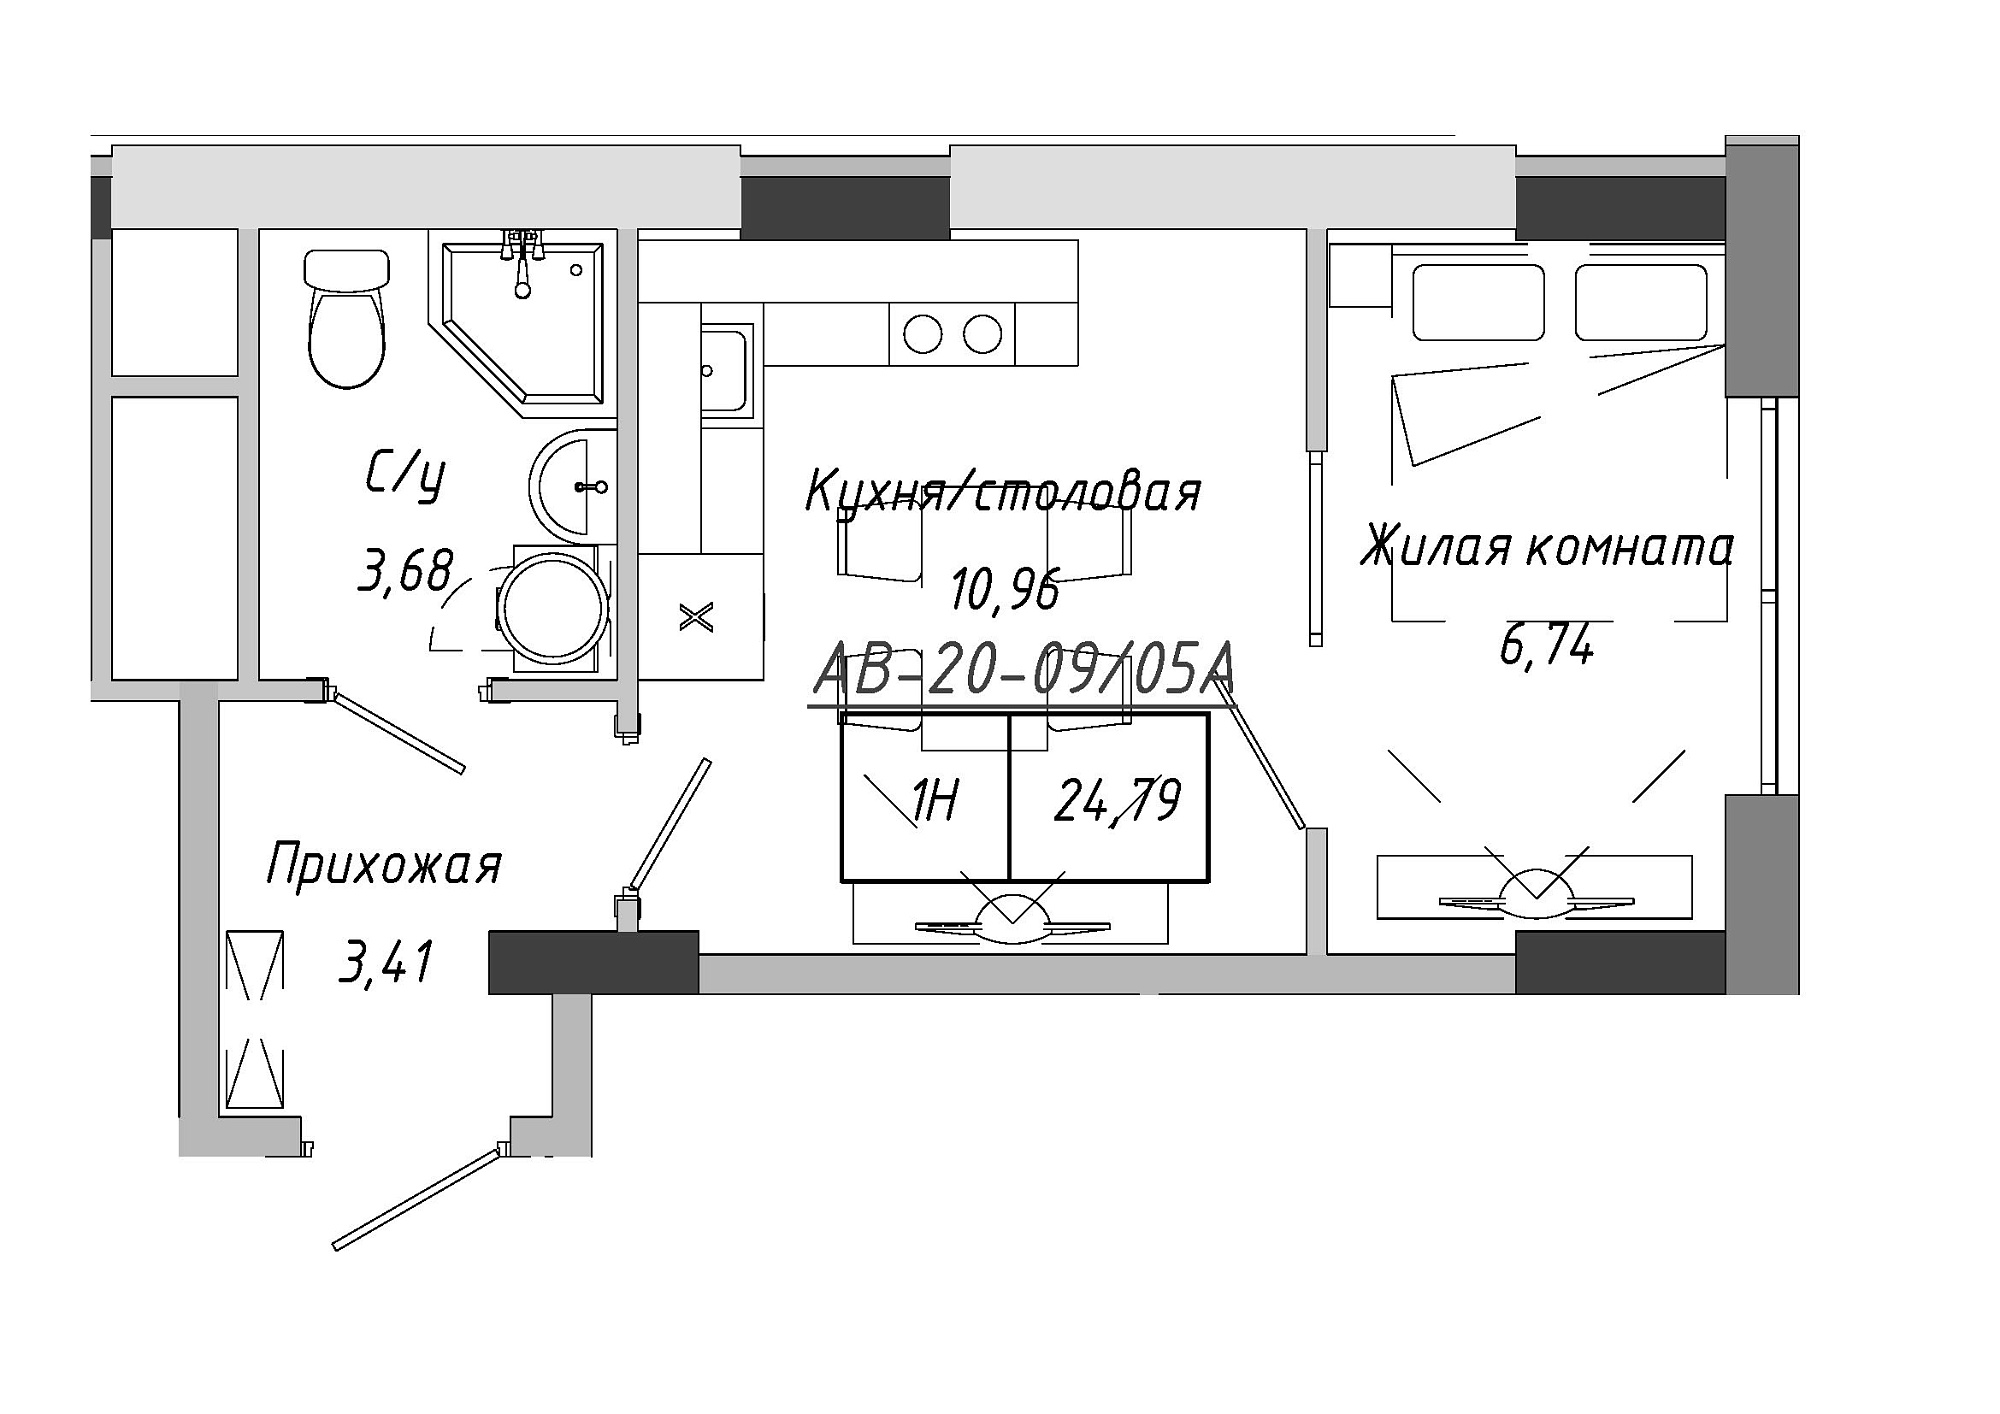 Planning 1-rm flats area 24.41m2, AB-20-09/0005а.